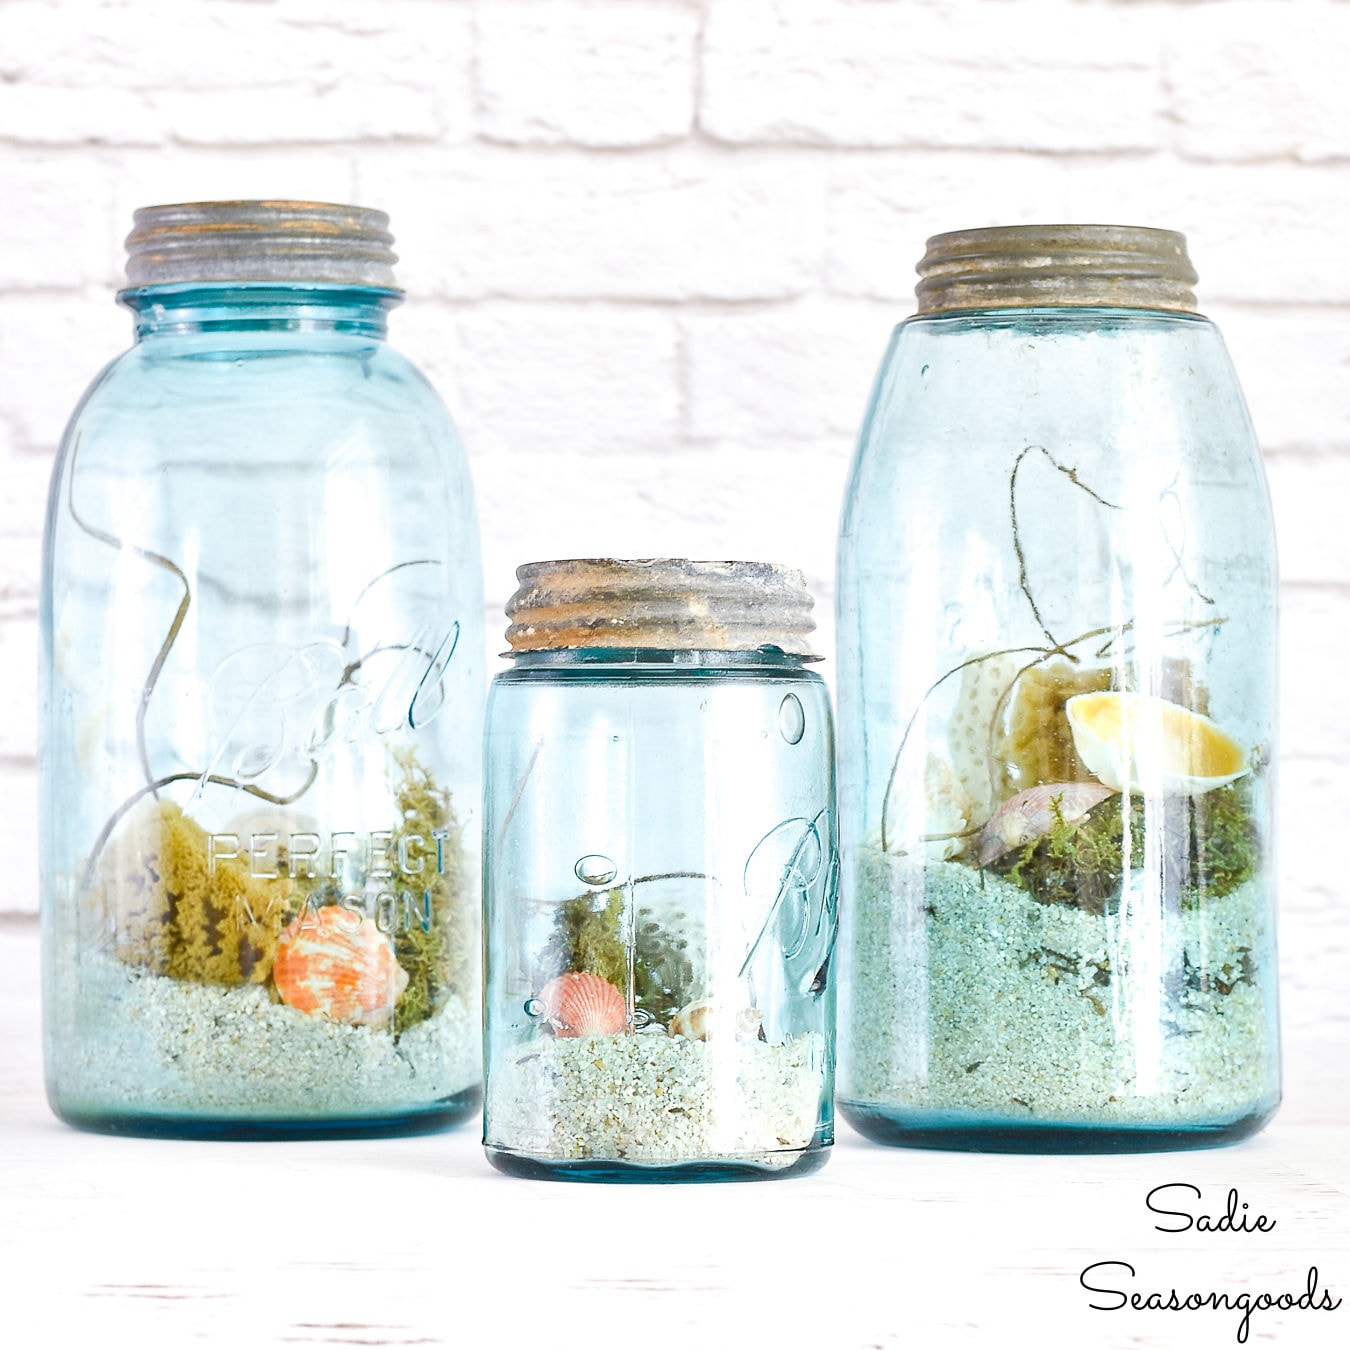 Are Mason Jars As Home Decor Going Out Of Style?